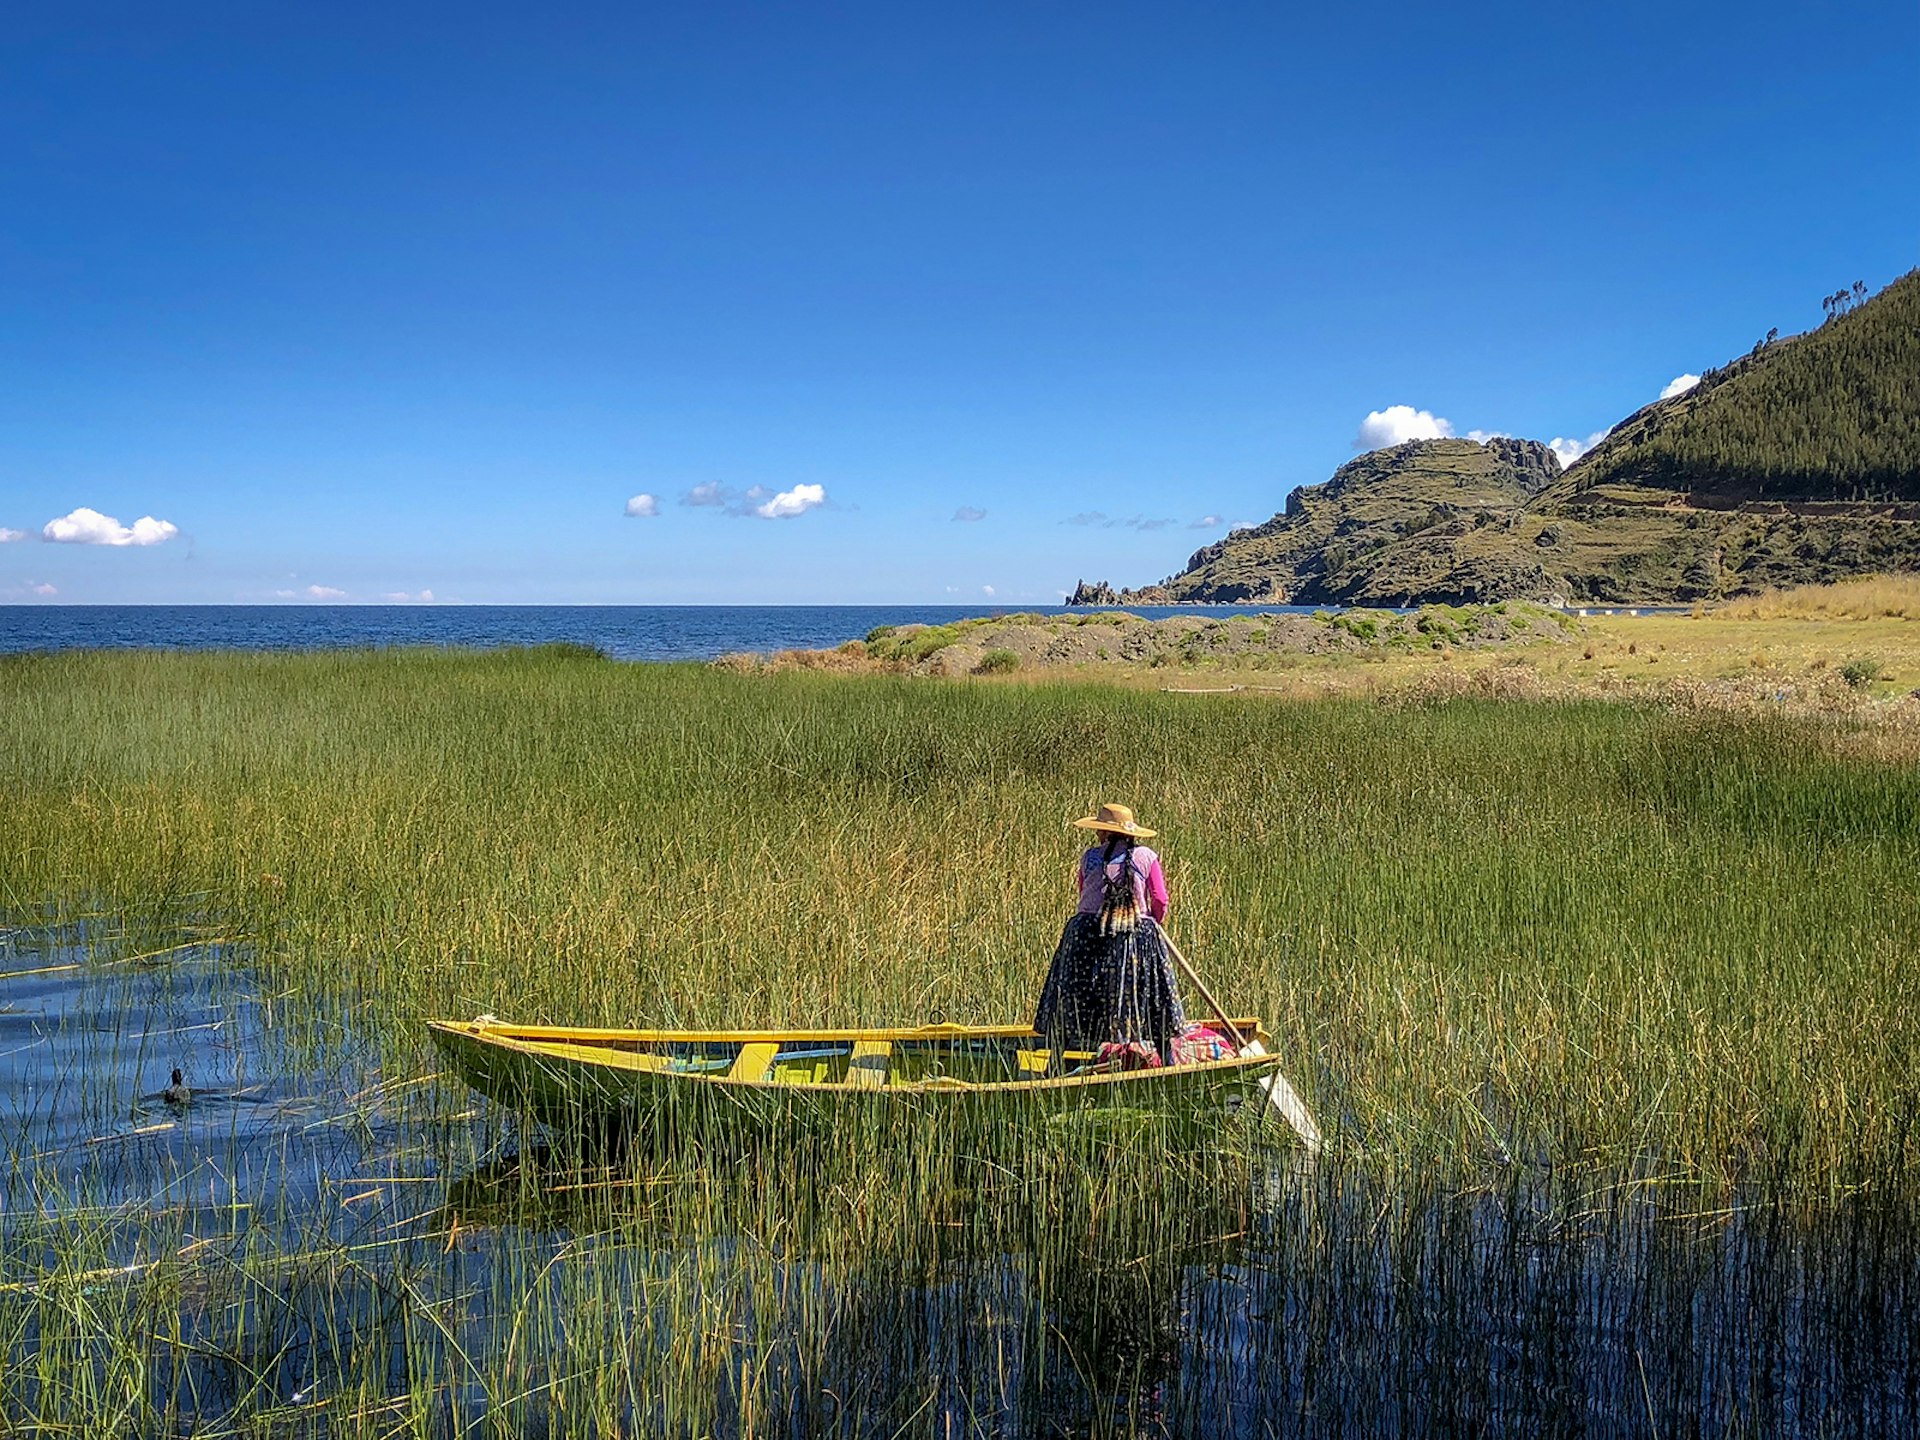 A woman in traditional Bolivian dress guides a yellow and green boat through a reed marsh on a sunny day in Isla Pariti, Bolivia